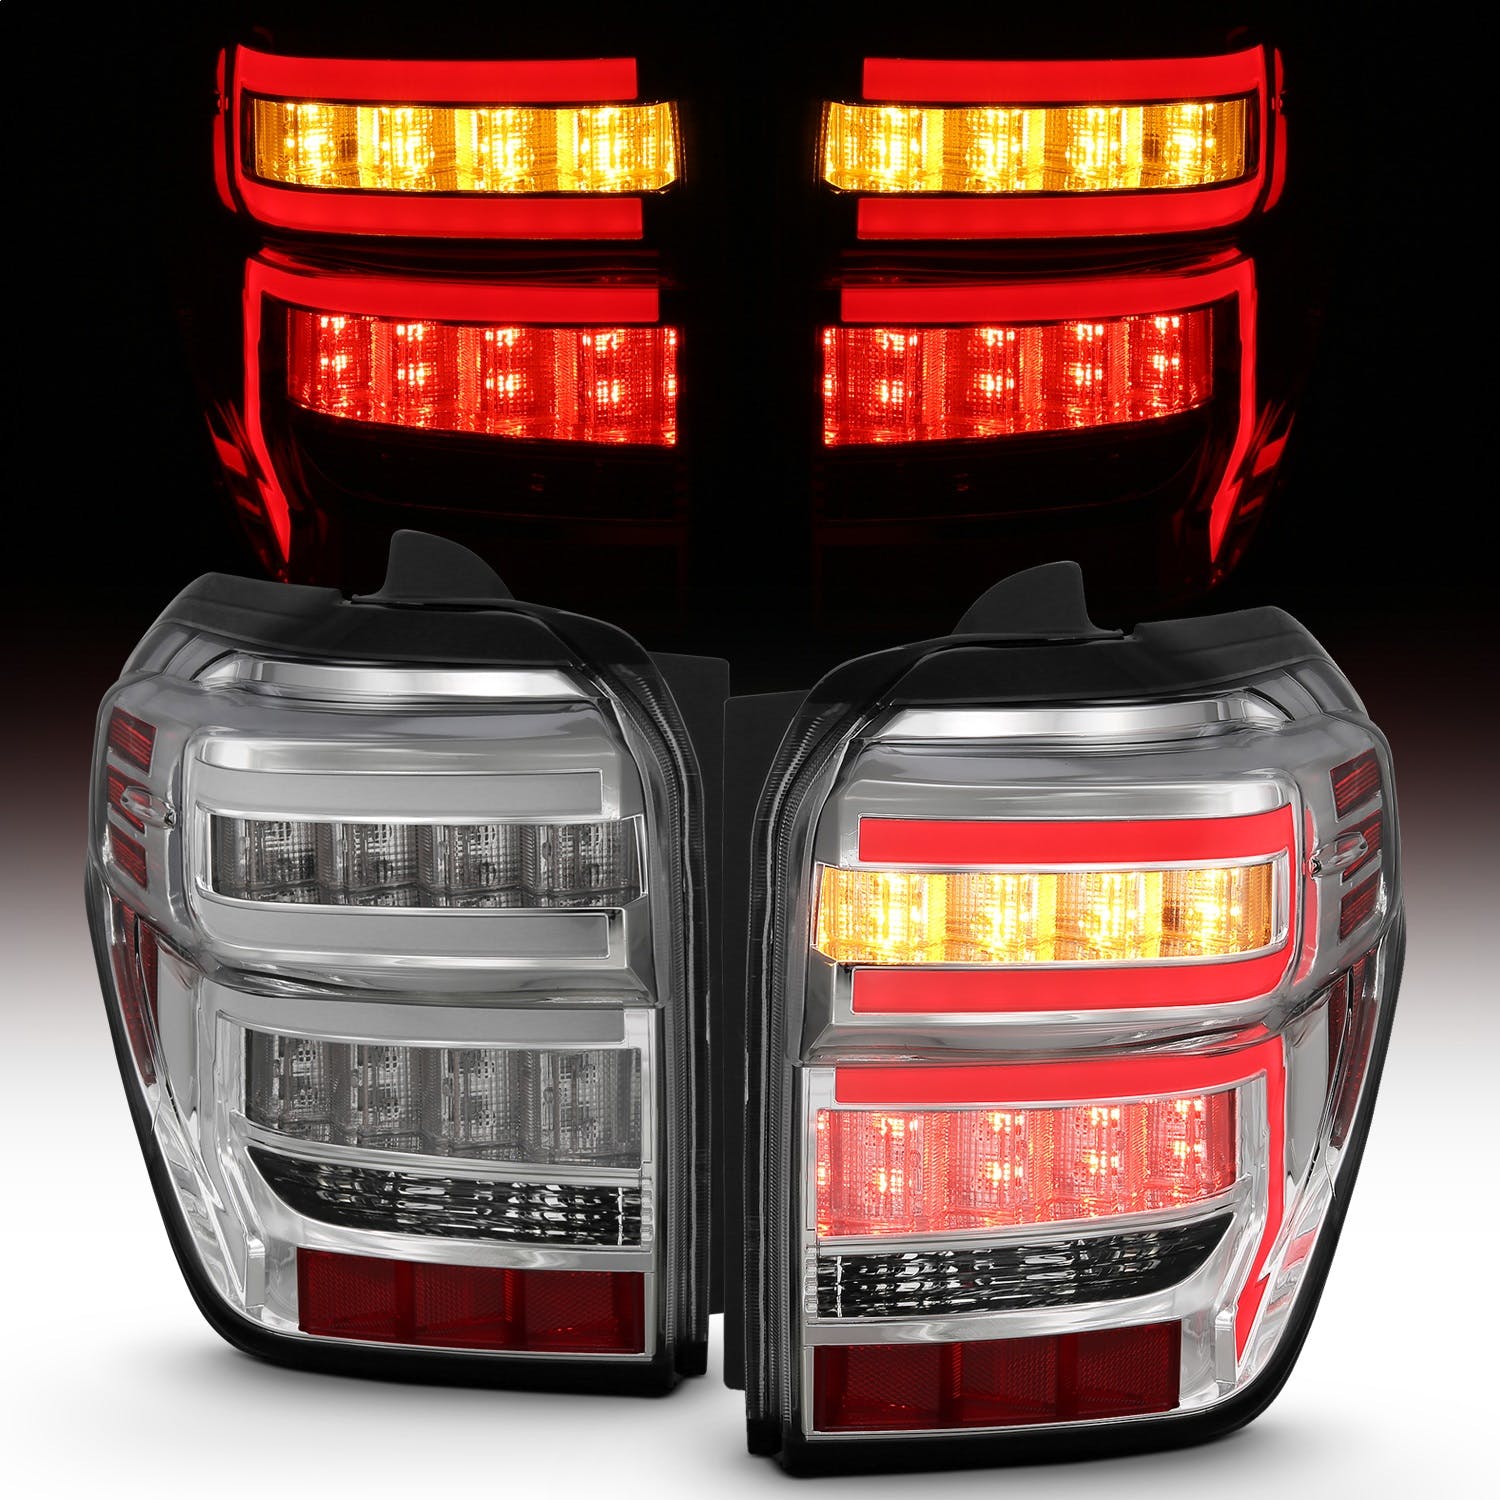 AnzoUSA 311313 Tail Lights Chrome Housing Clear Lens Red Light Bar With sequential